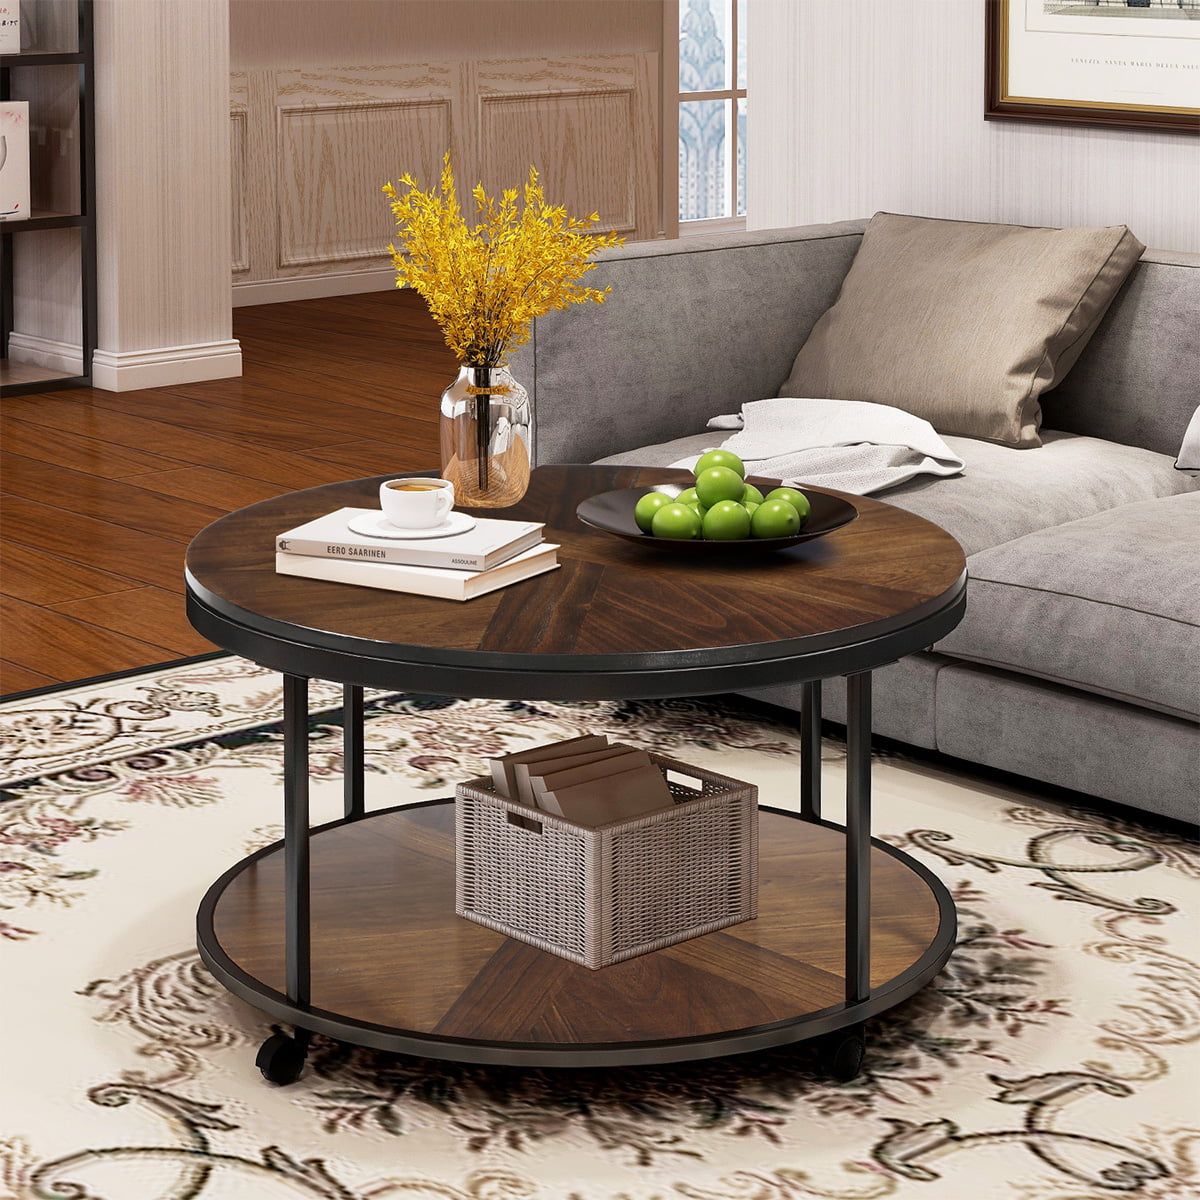 Sentern Round Coffee Table With Caster Wheels And Unique Textured Inside Round Coffee Tables (Photo 3 of 15)